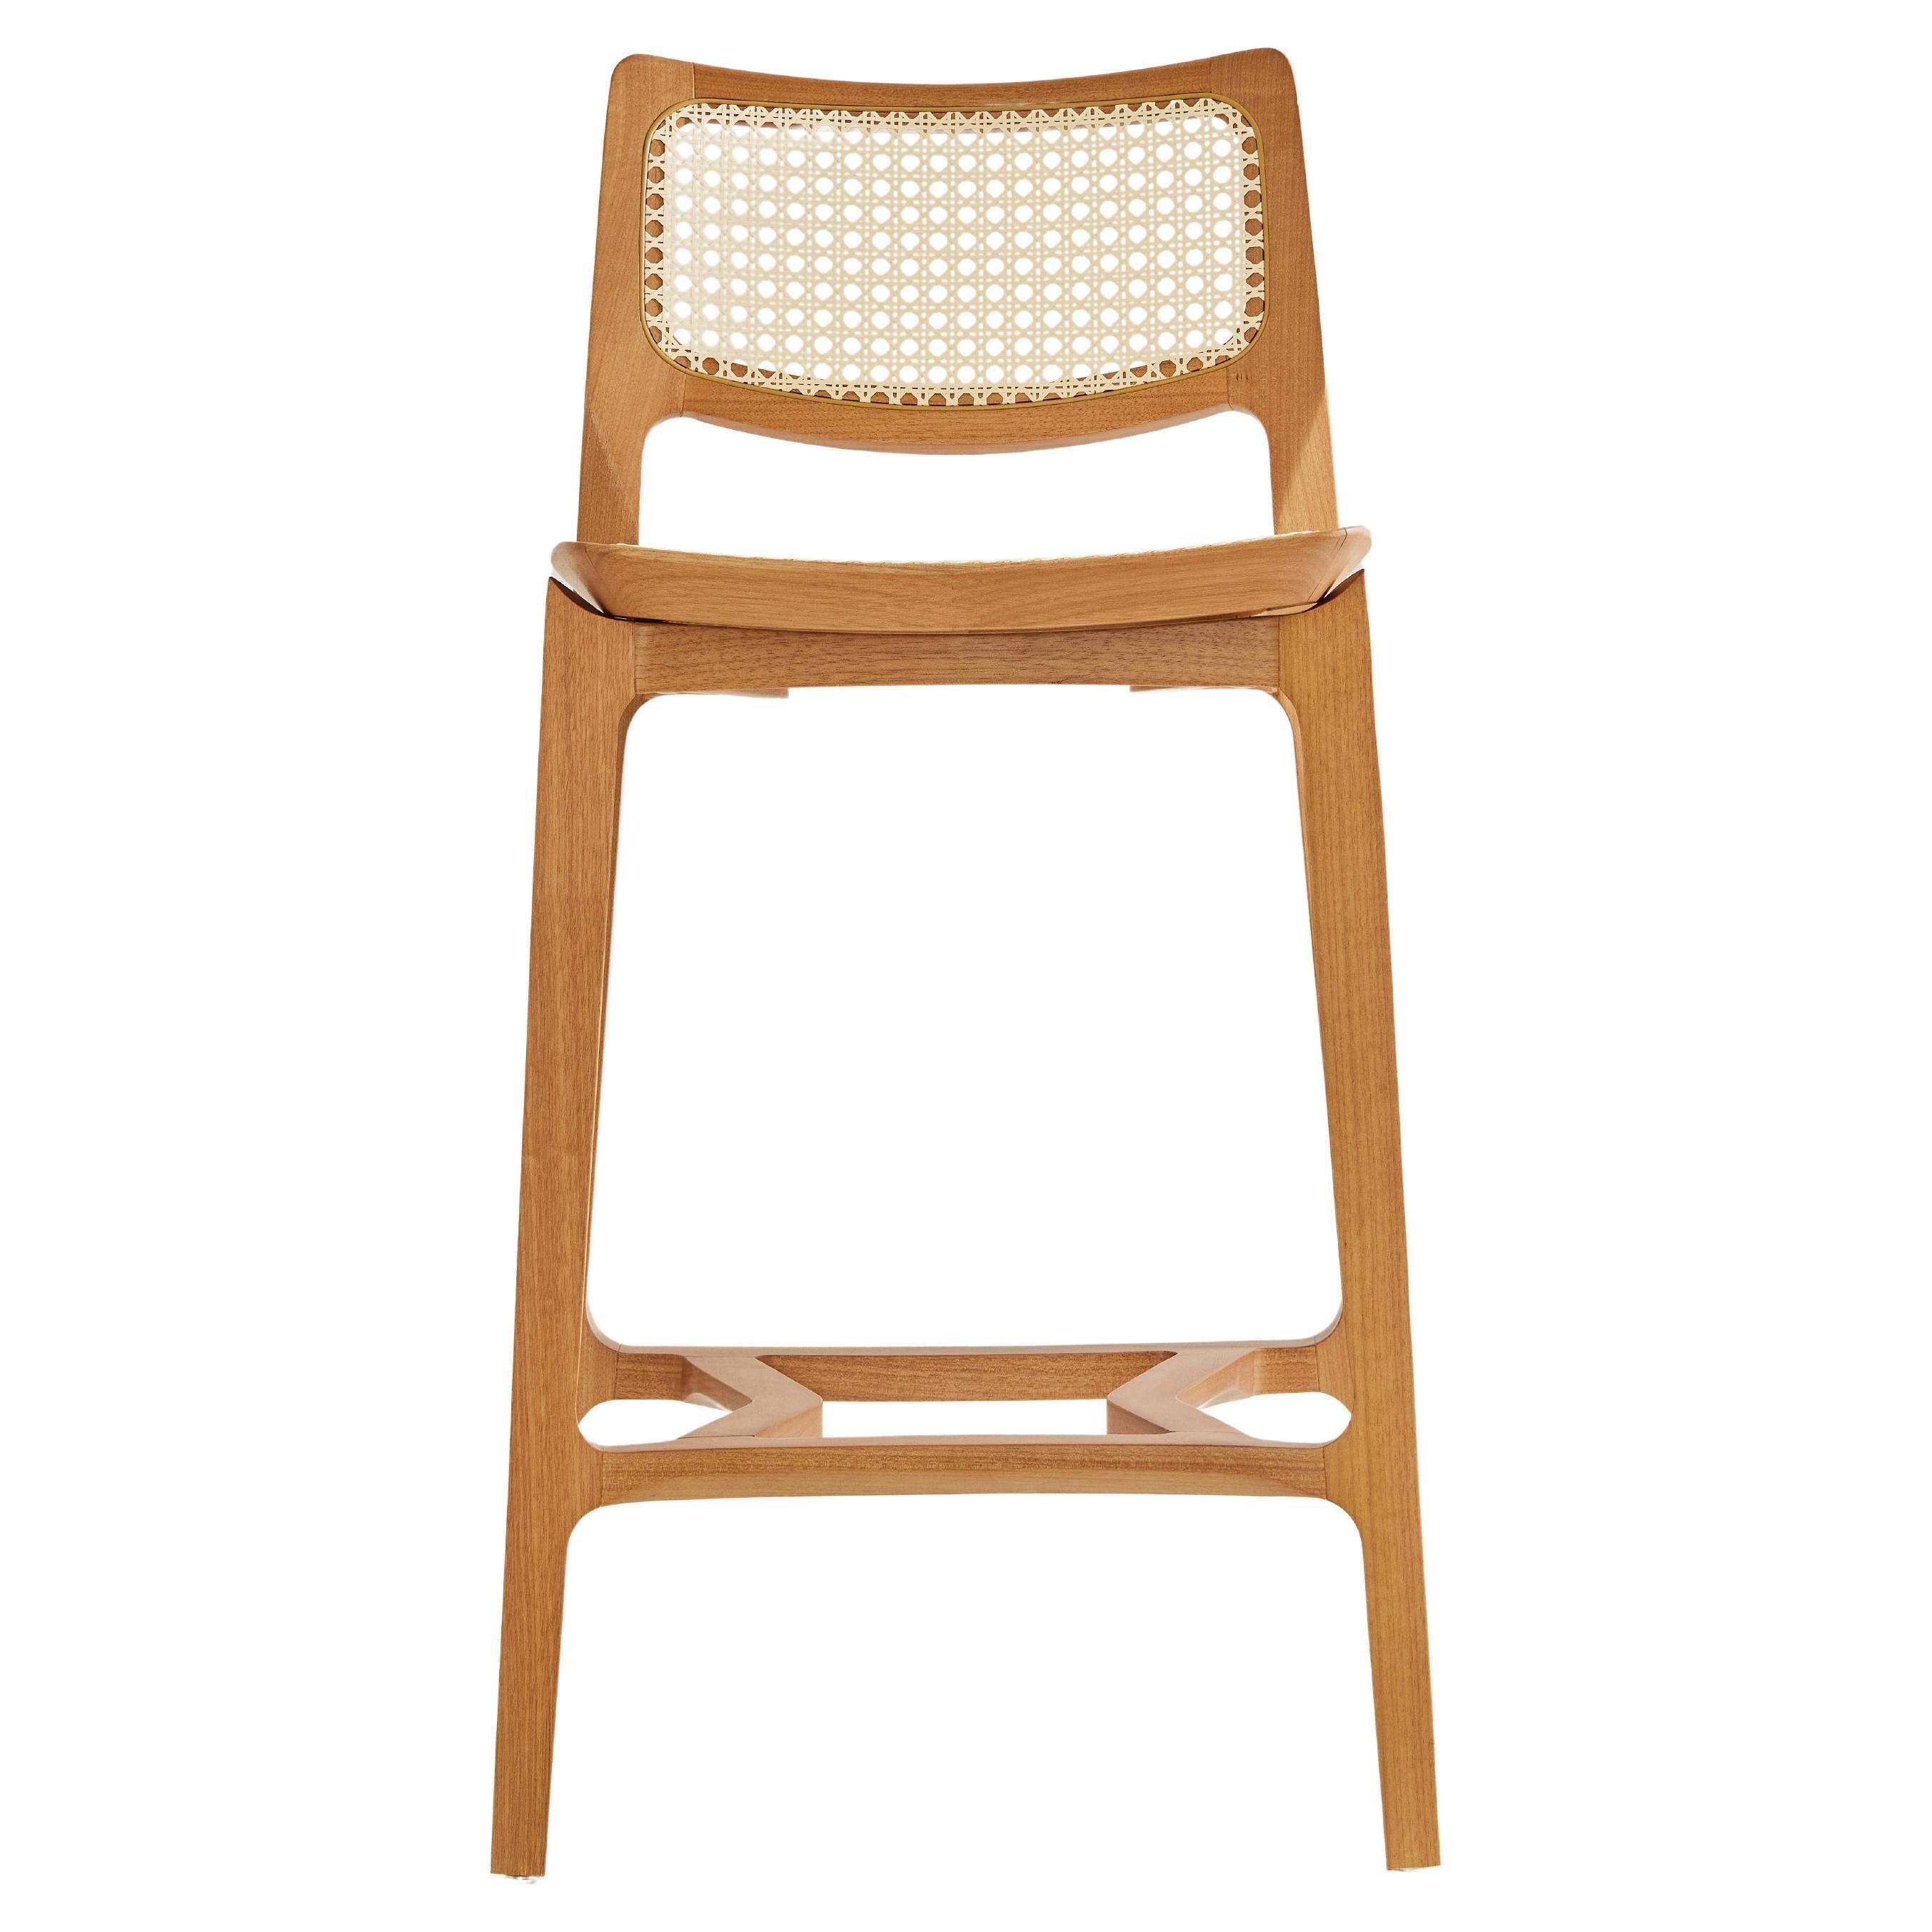 Aurora stool, light honey solid wood, natural caning back, cane seating